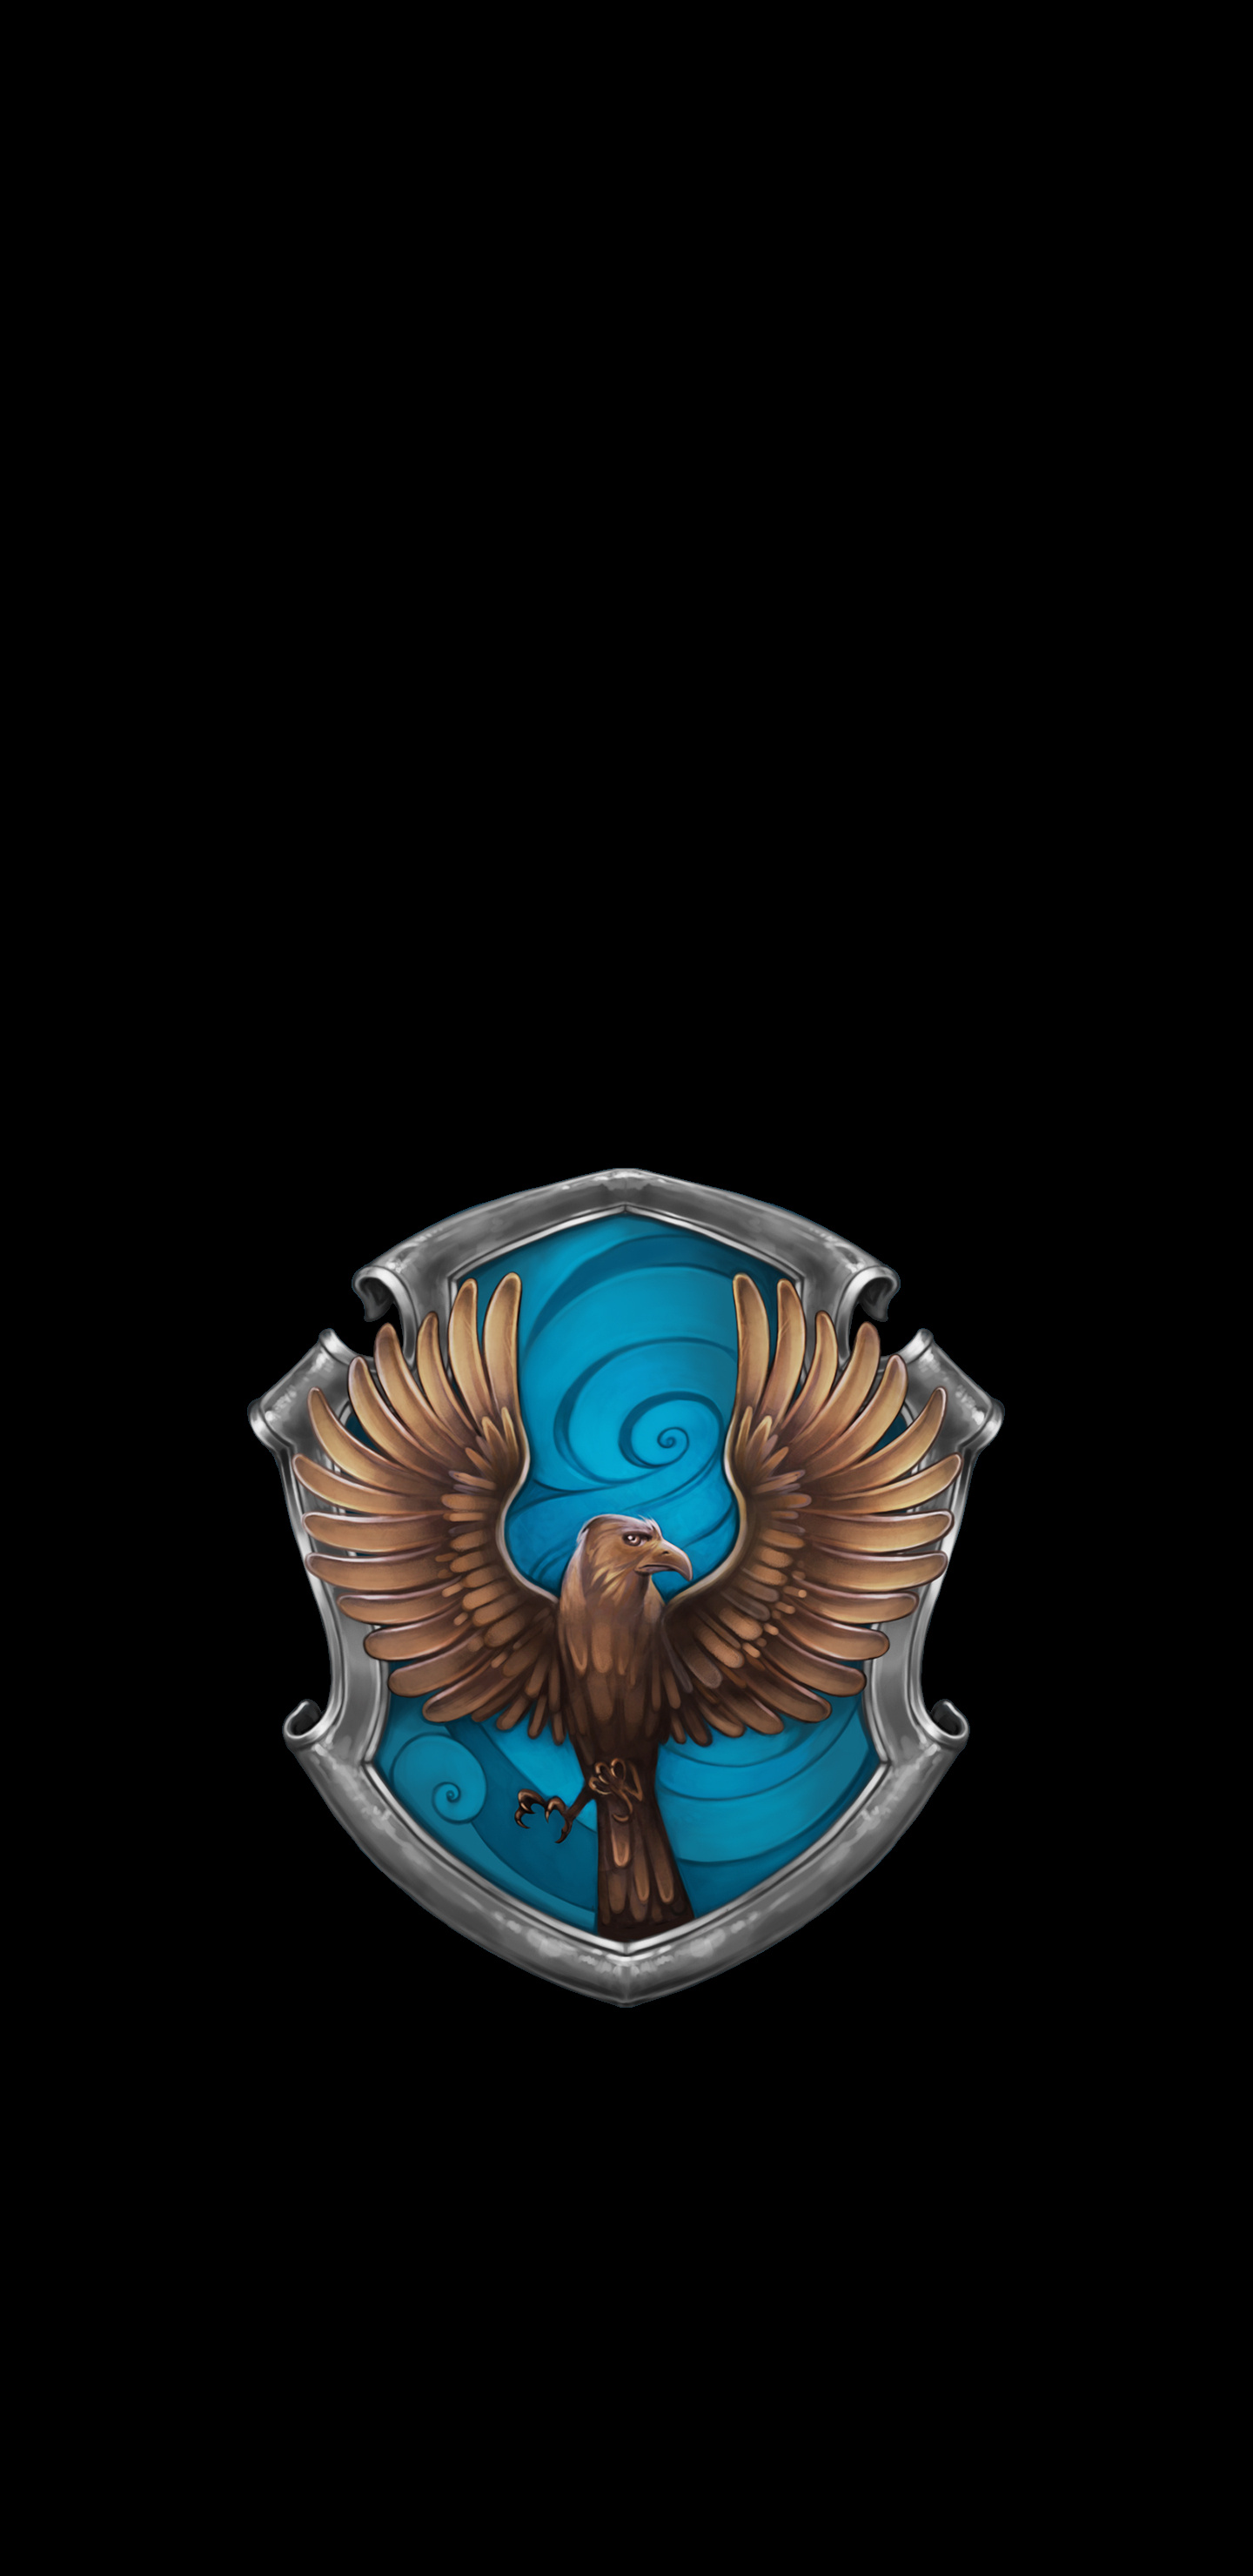 Ravenclaw & Slytherin, House crest, Amoled wallpaper, Mobile phones, 1440x2960 HD Handy